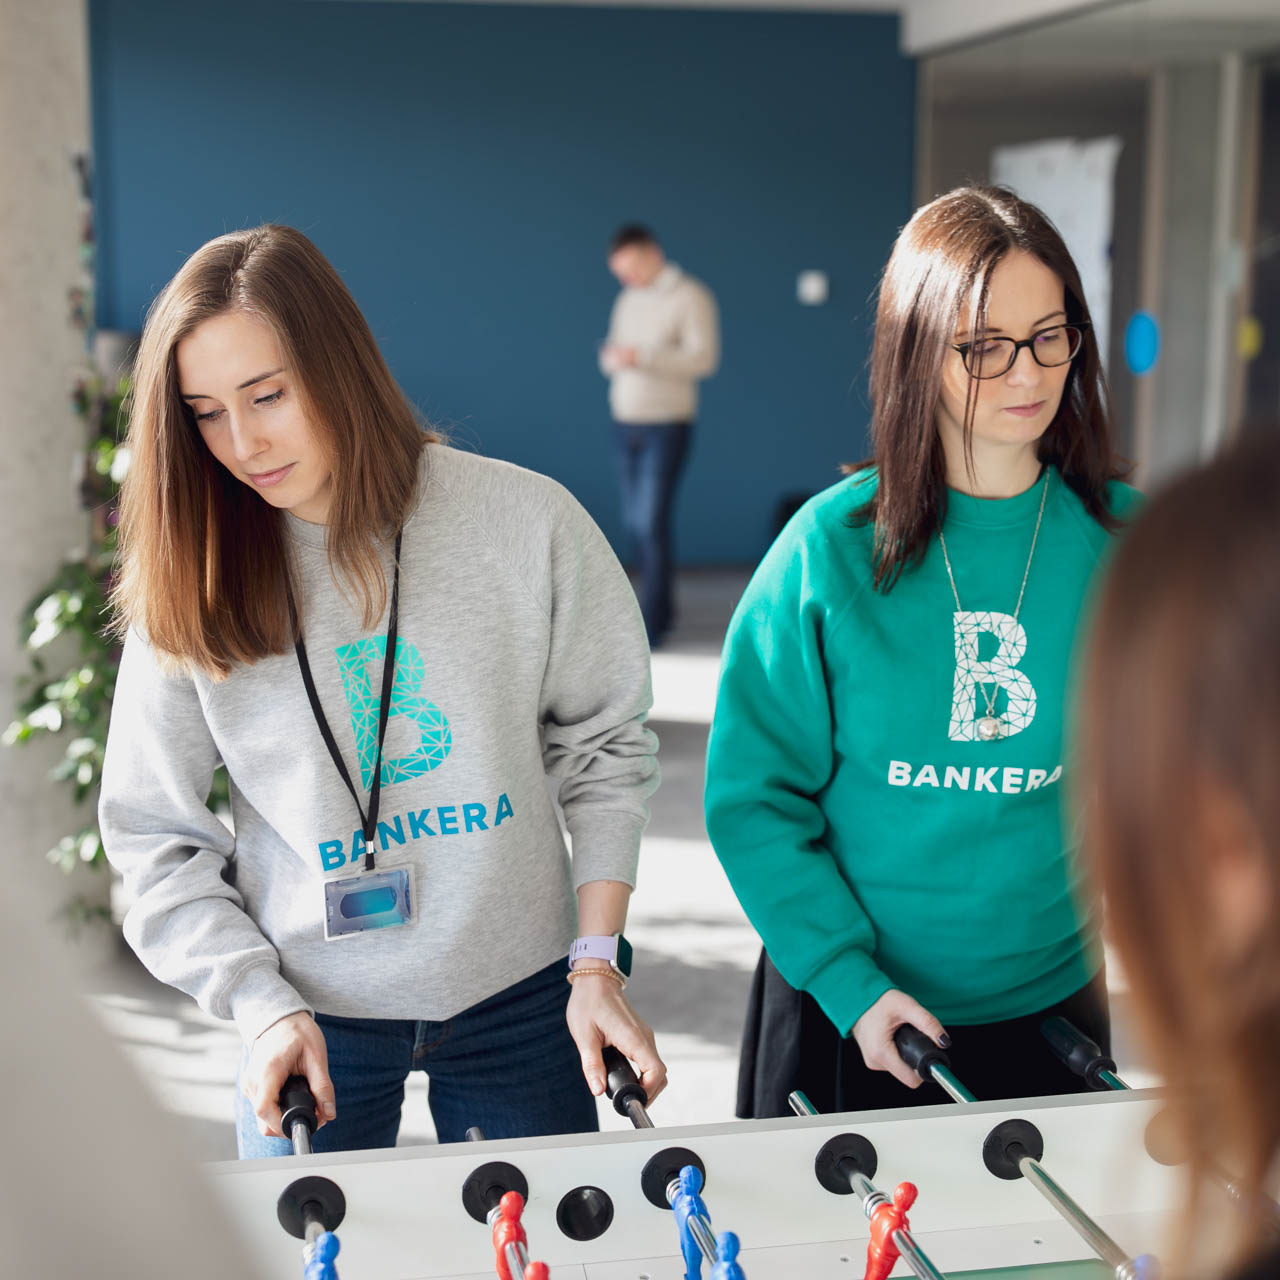 Bankera provides its employees with a number of office perks.